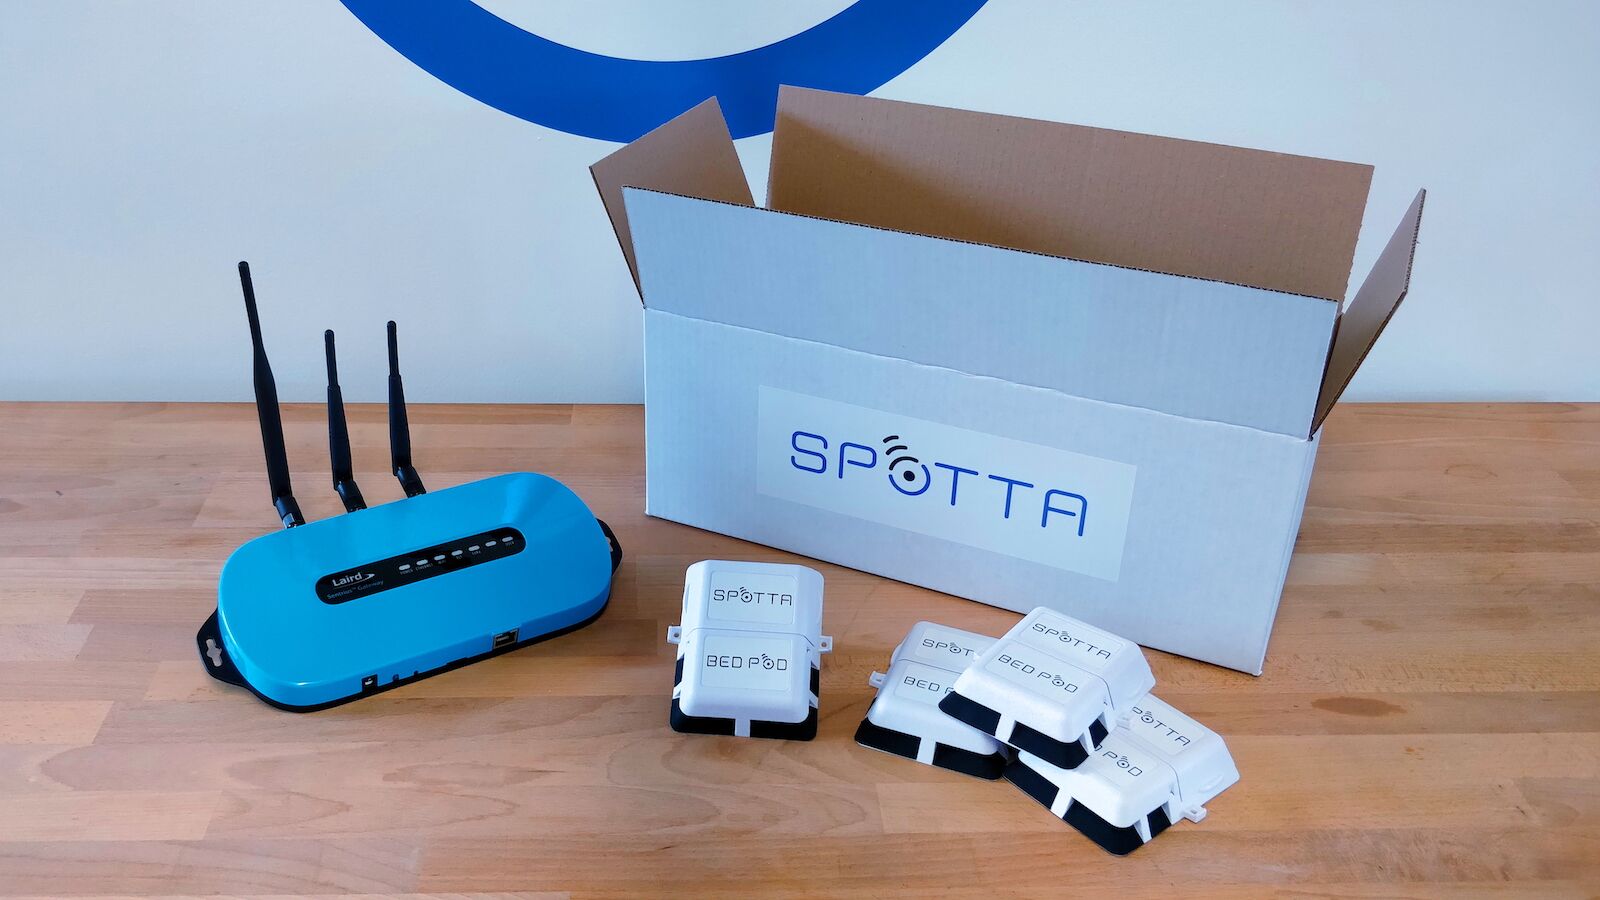 Detection device from Spotta to catch bed bugs